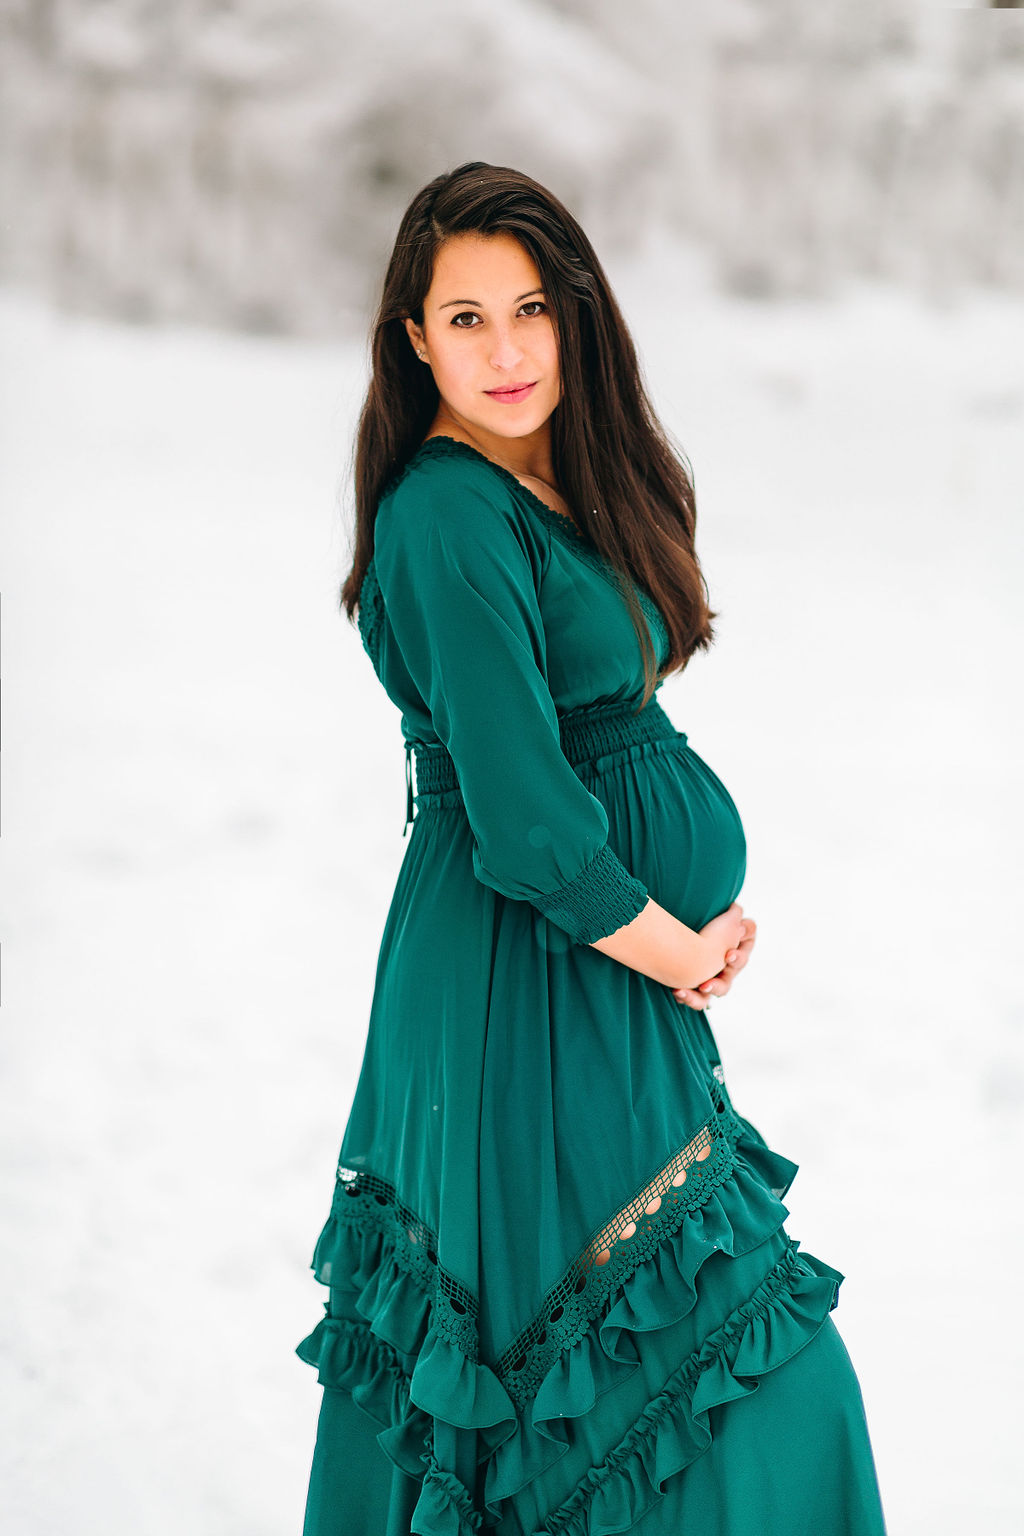 A mother-to-be in a teal maternity dress stands in a snowy forest while holding her bump women in motion